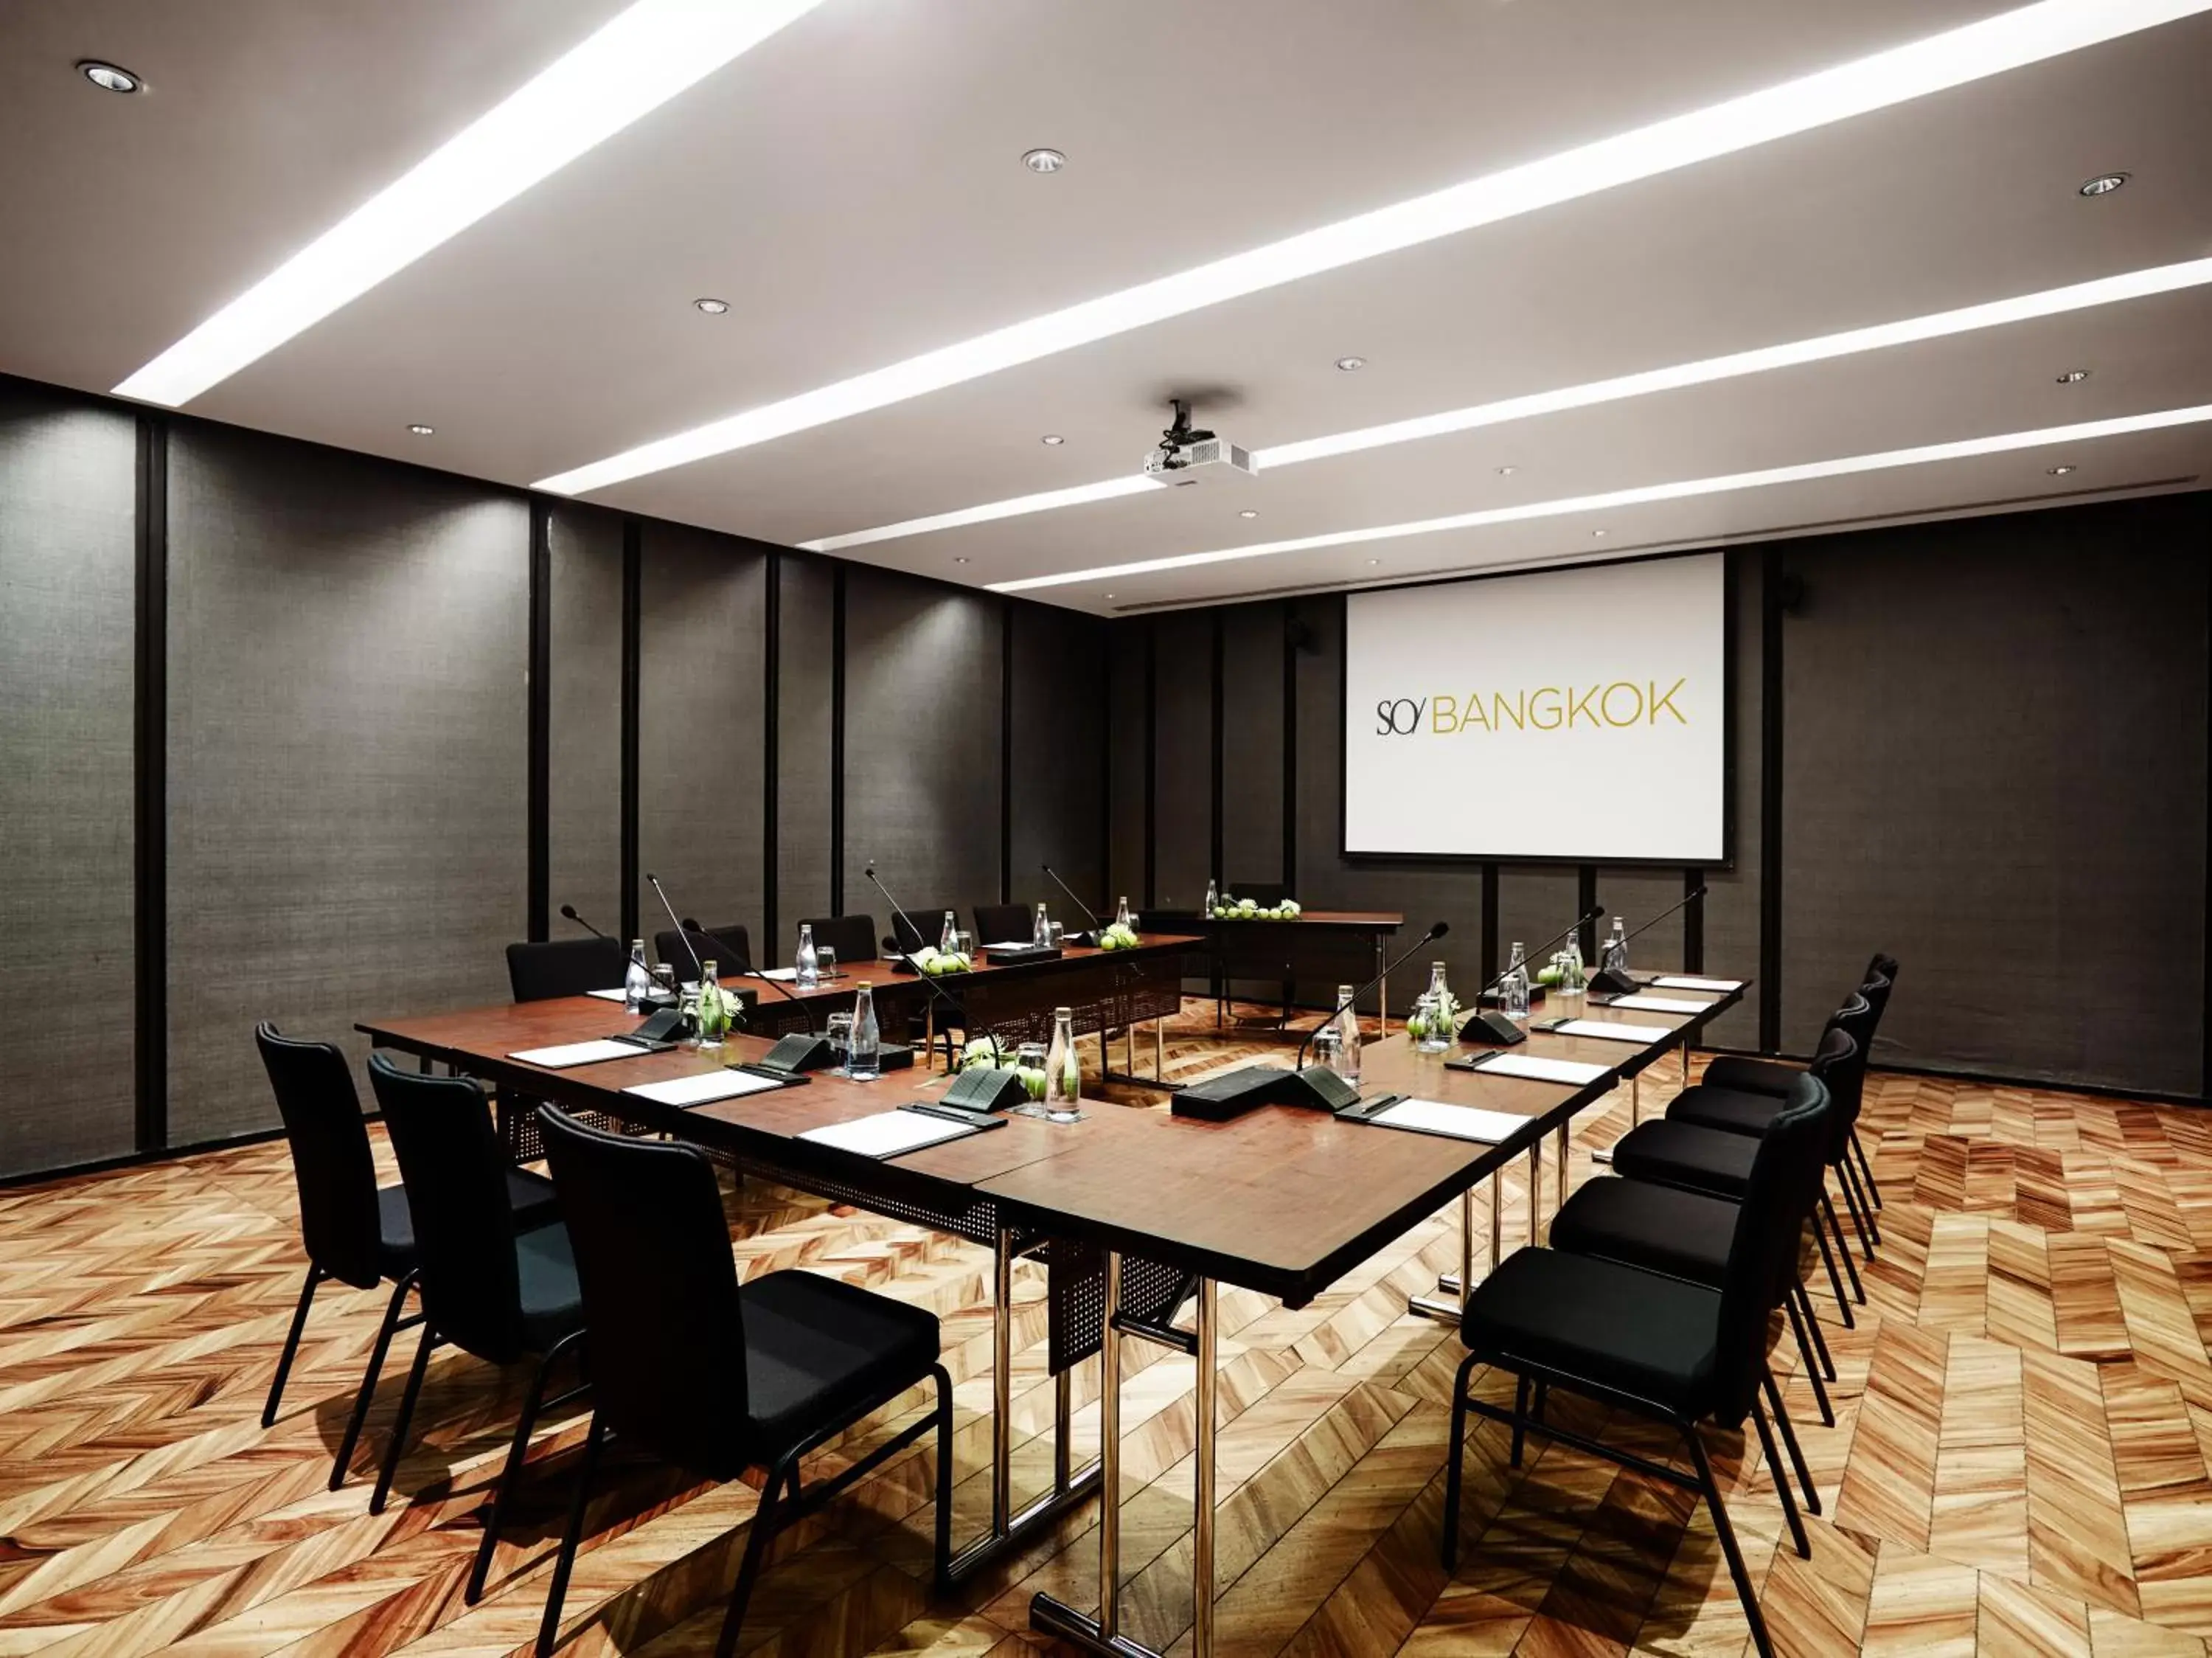 Meeting/conference room in SO Bangkok